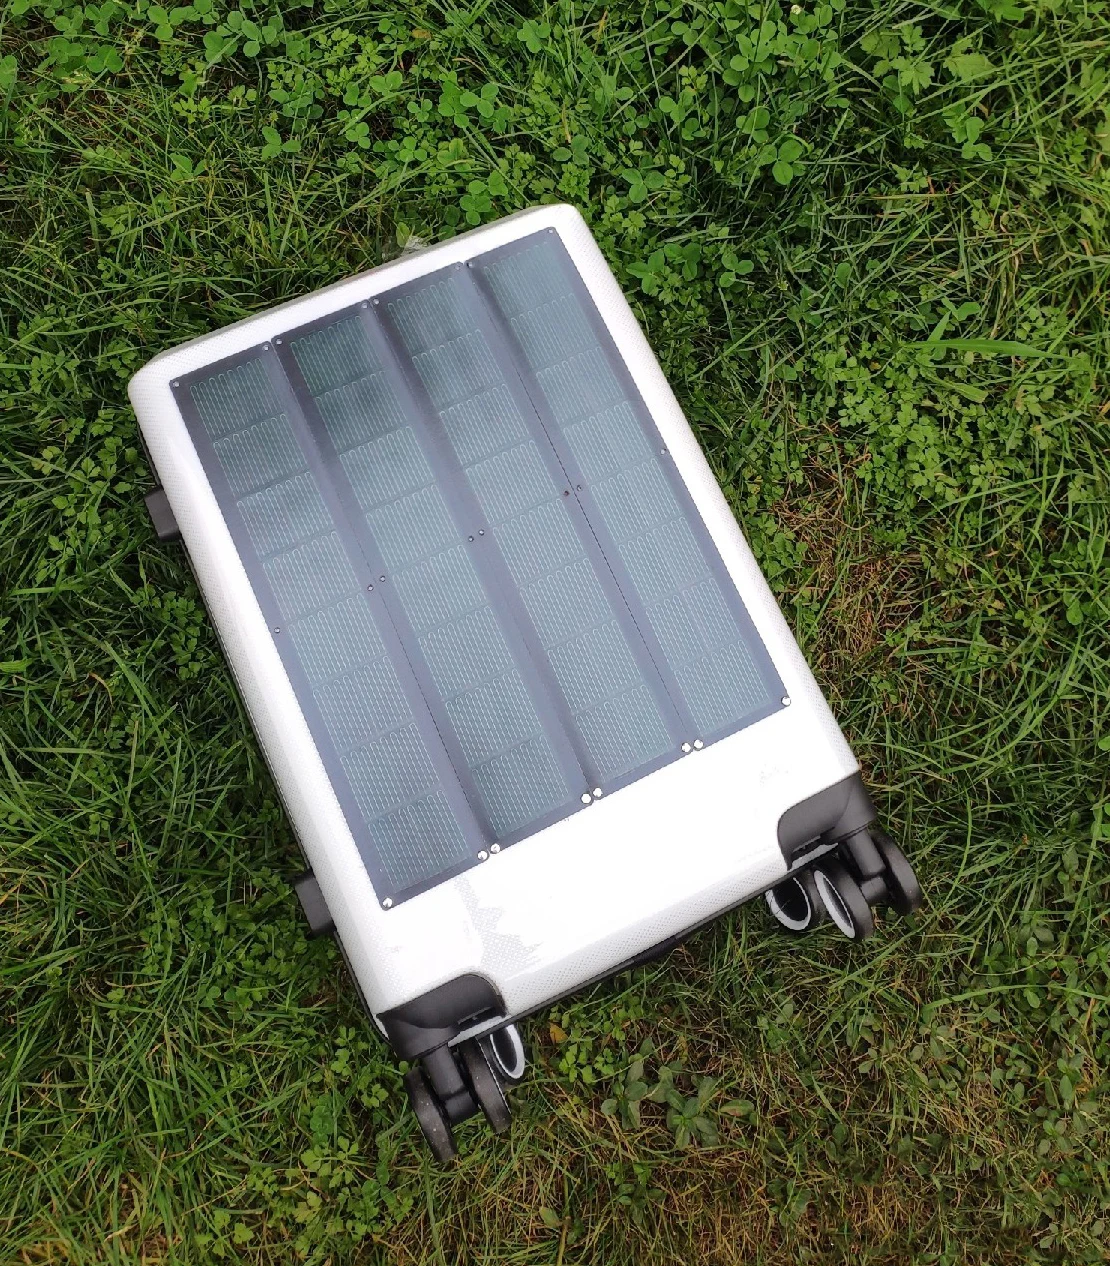 Flexible Long size panel solar power CIGS Thin Film solar panel DIY Battery Charger Photovoltaic solar cell flex Waterproof 2W7V images - 6